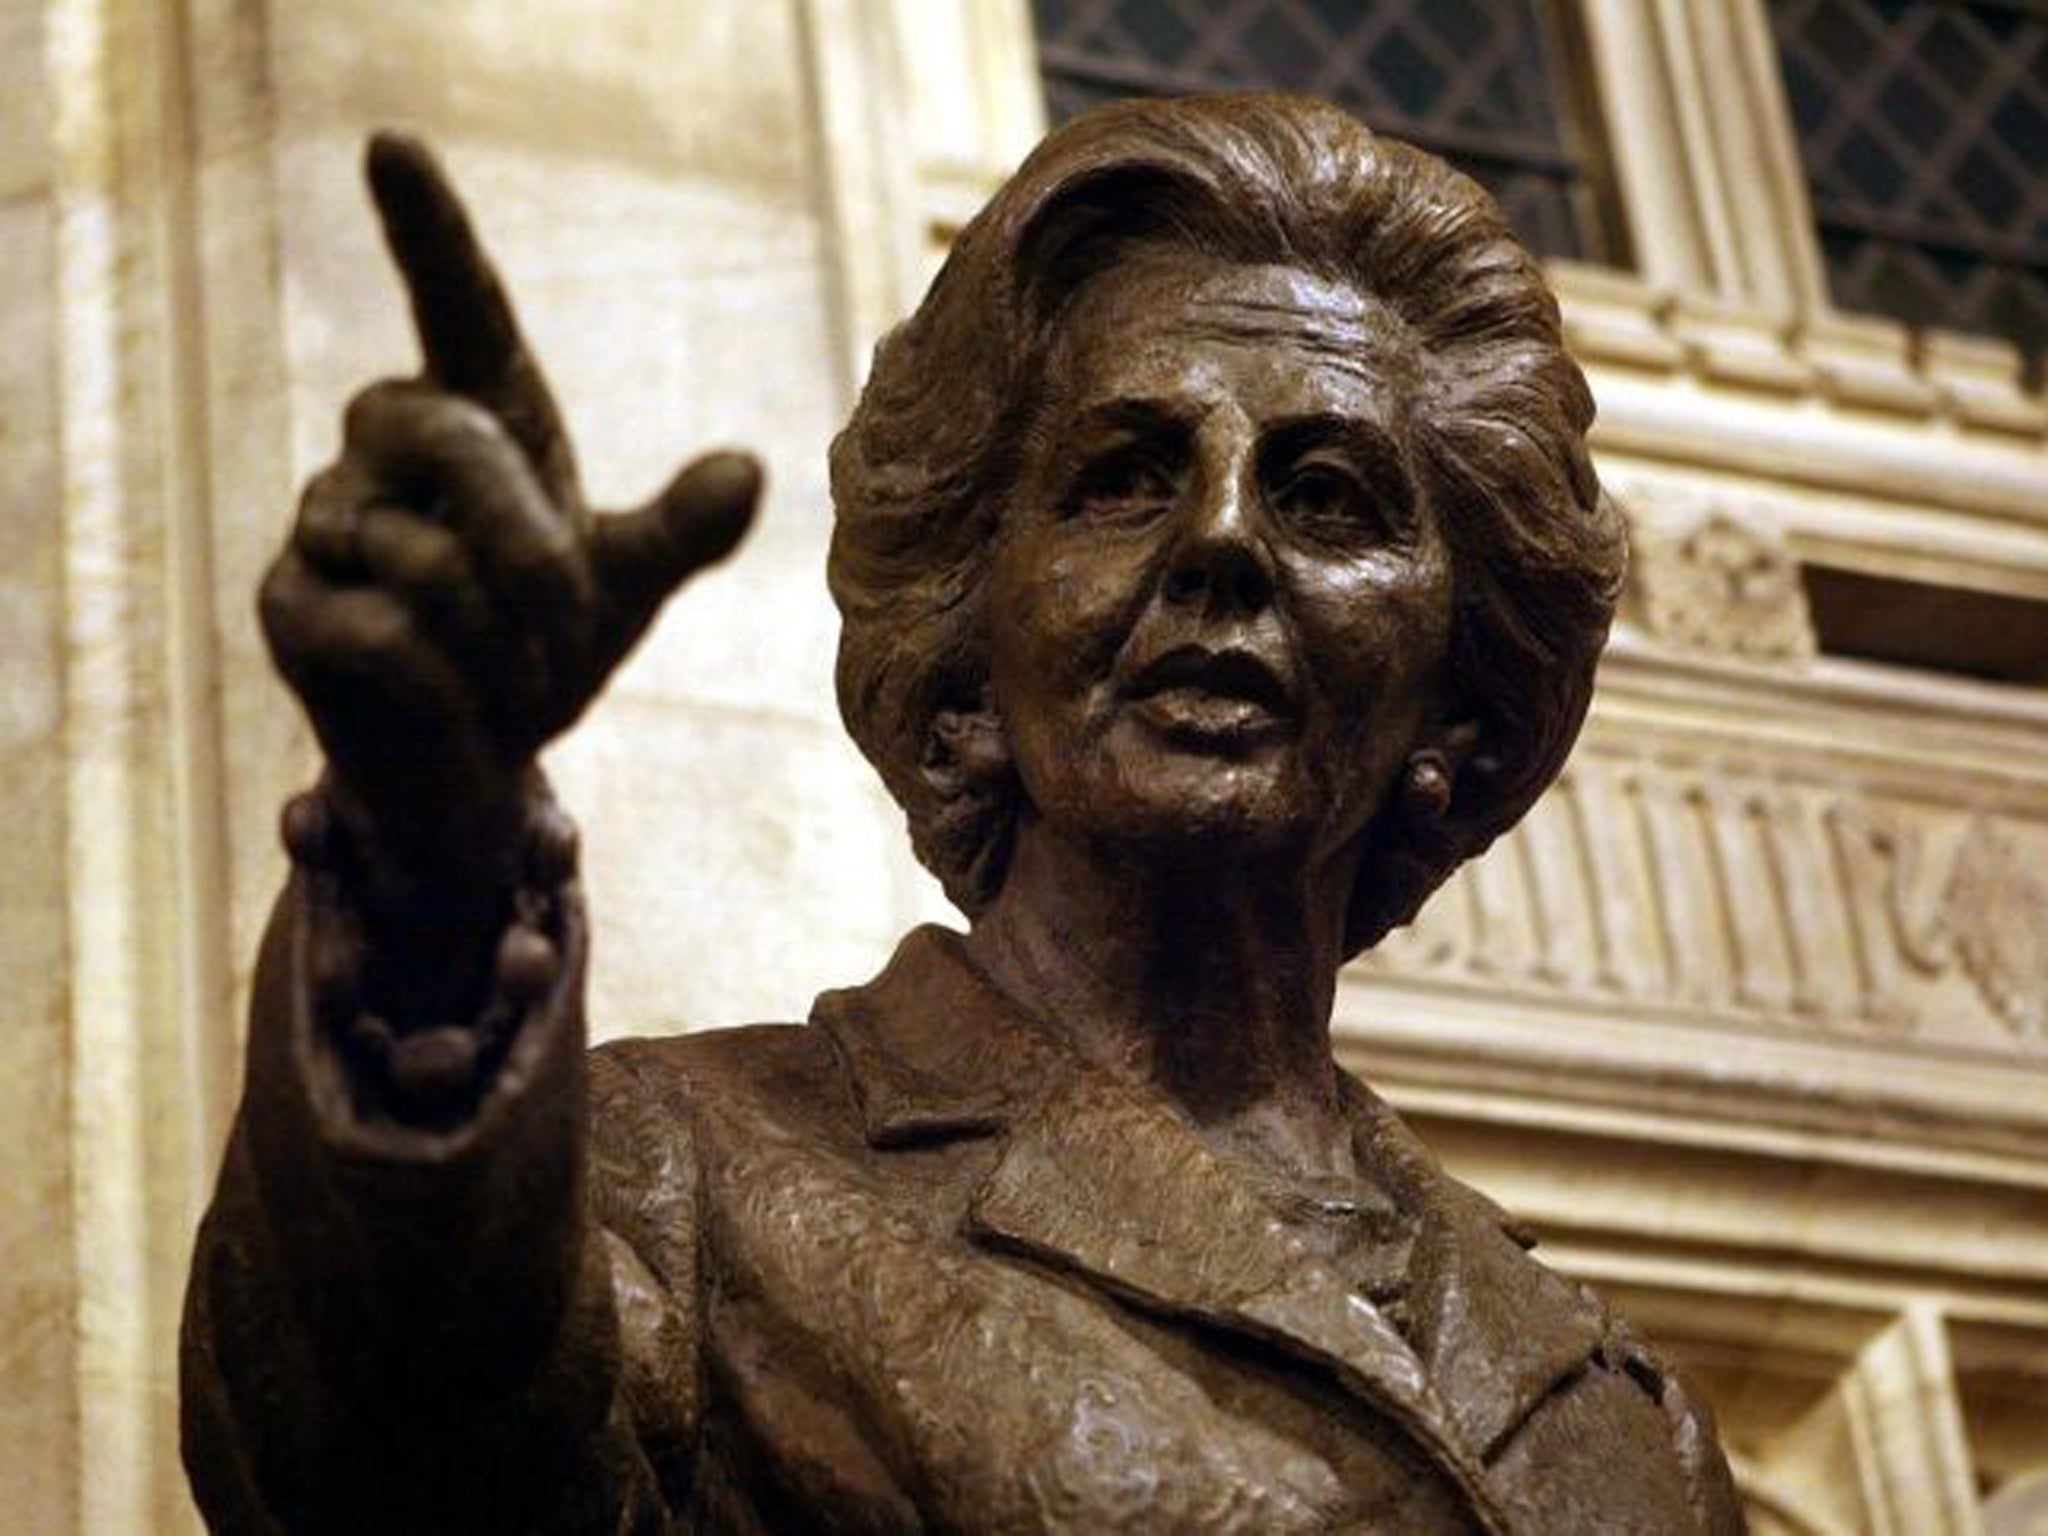 A bronze statue of former British Prime Minister Baroness Margaret Thatcher inside the Palace of Westminster